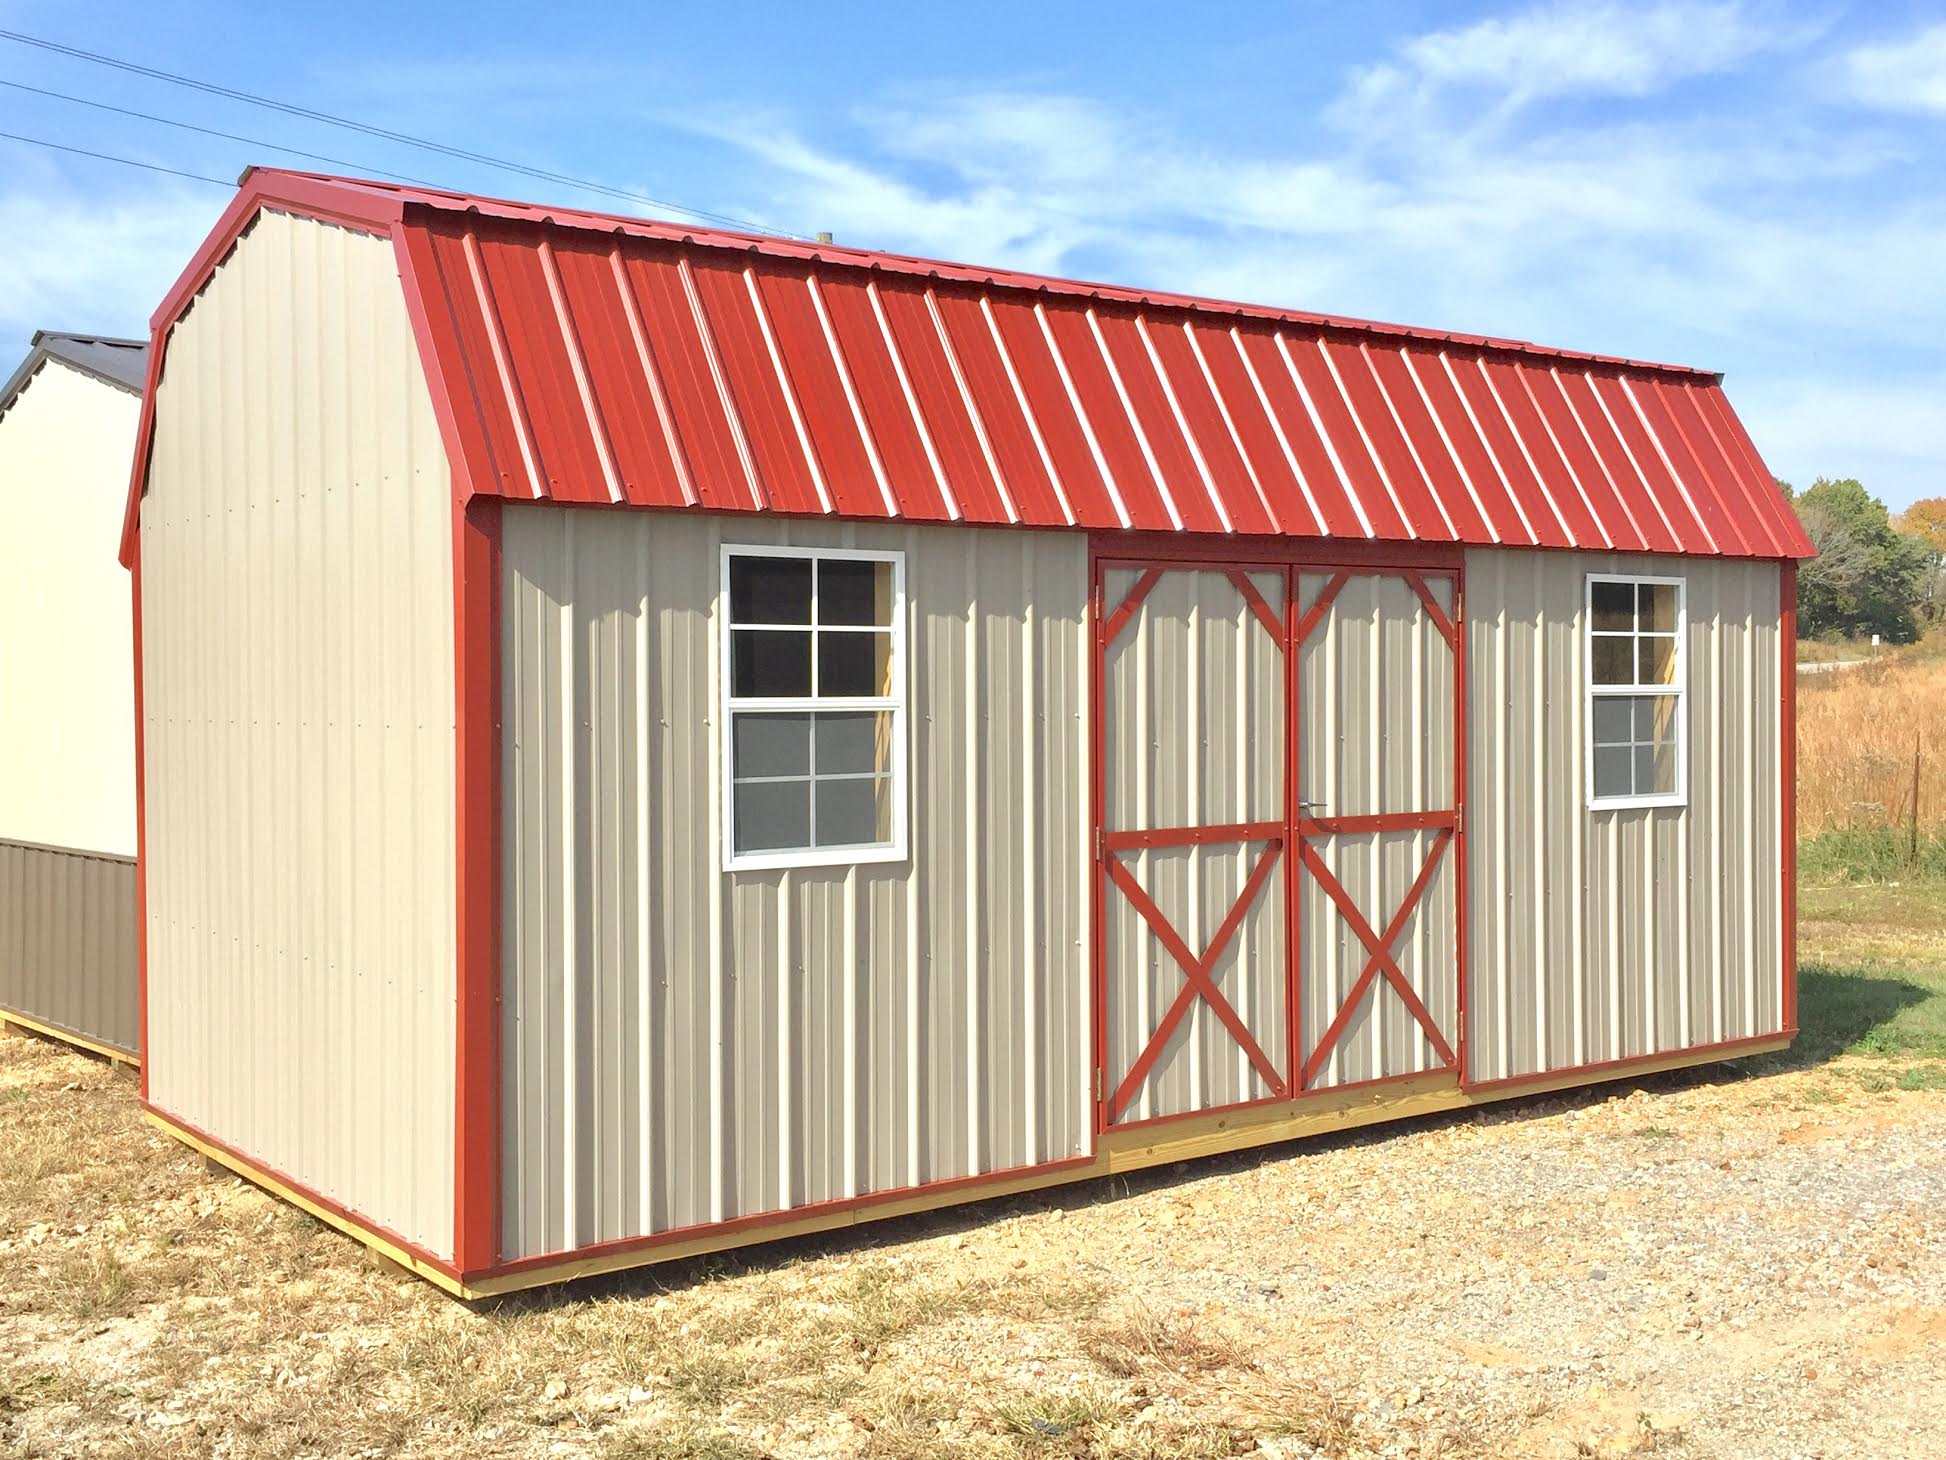 Tan all metal garden shed with red trim and roof